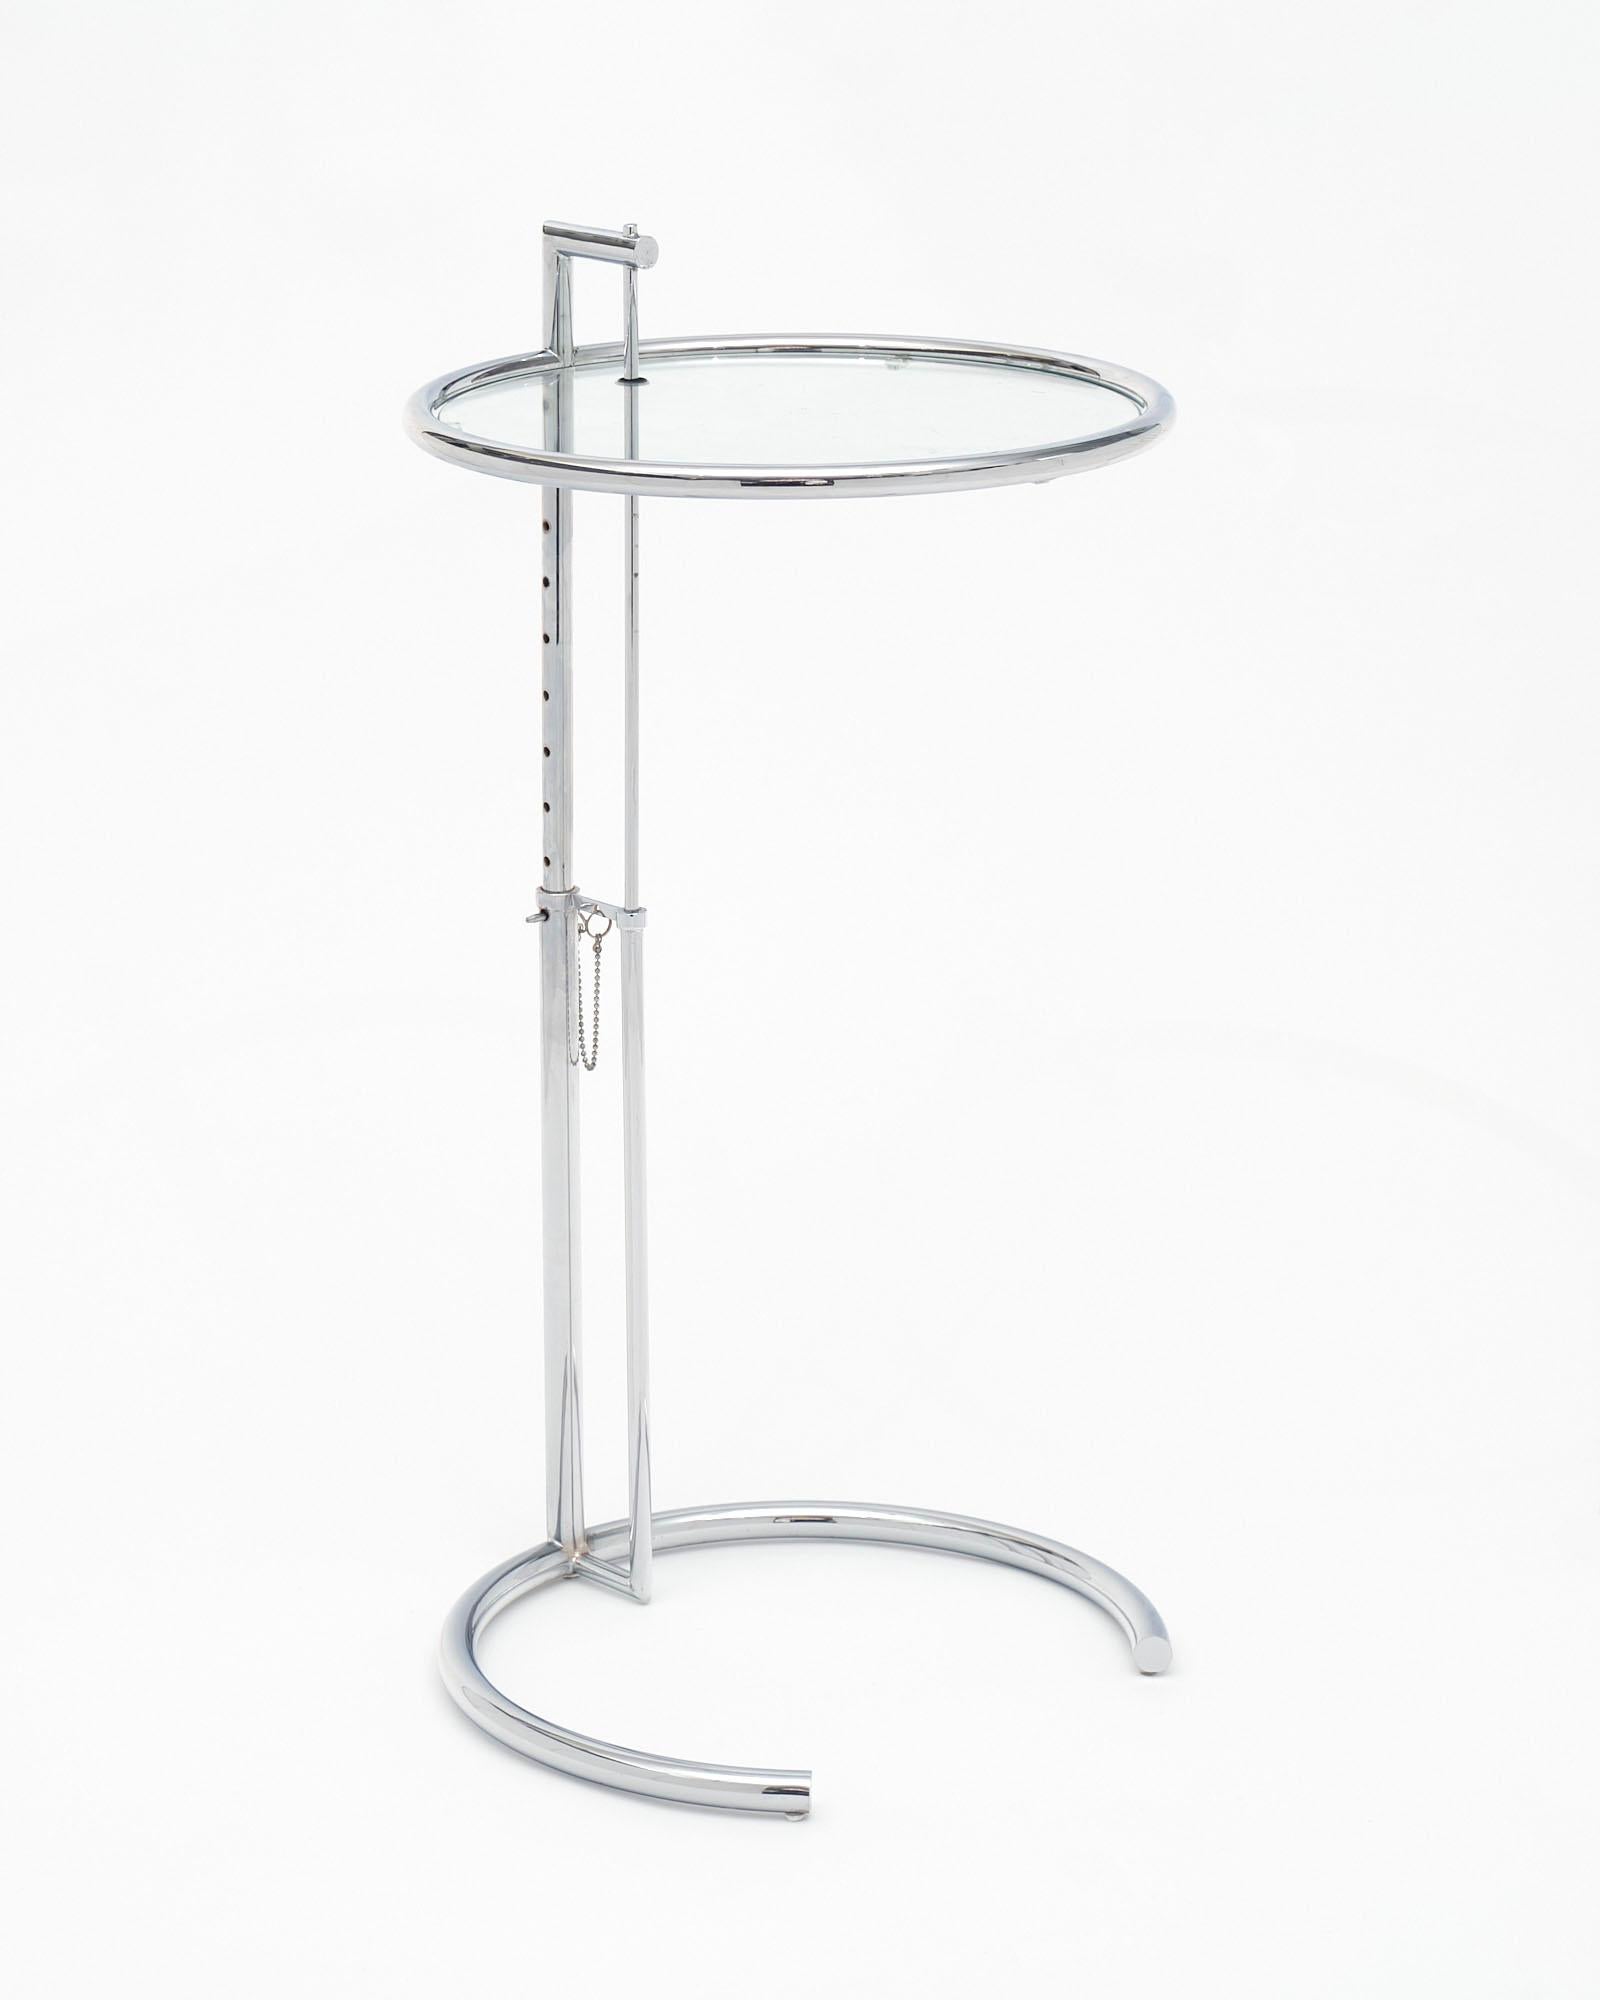 This iconic adjustable side table was designed by Irish designer Eileen Gray in 1927. Table E 1027 is an adjustable steel and glass. Originally created for her E-1027 house; the table has since become one of Gray's most famous designs. The table's